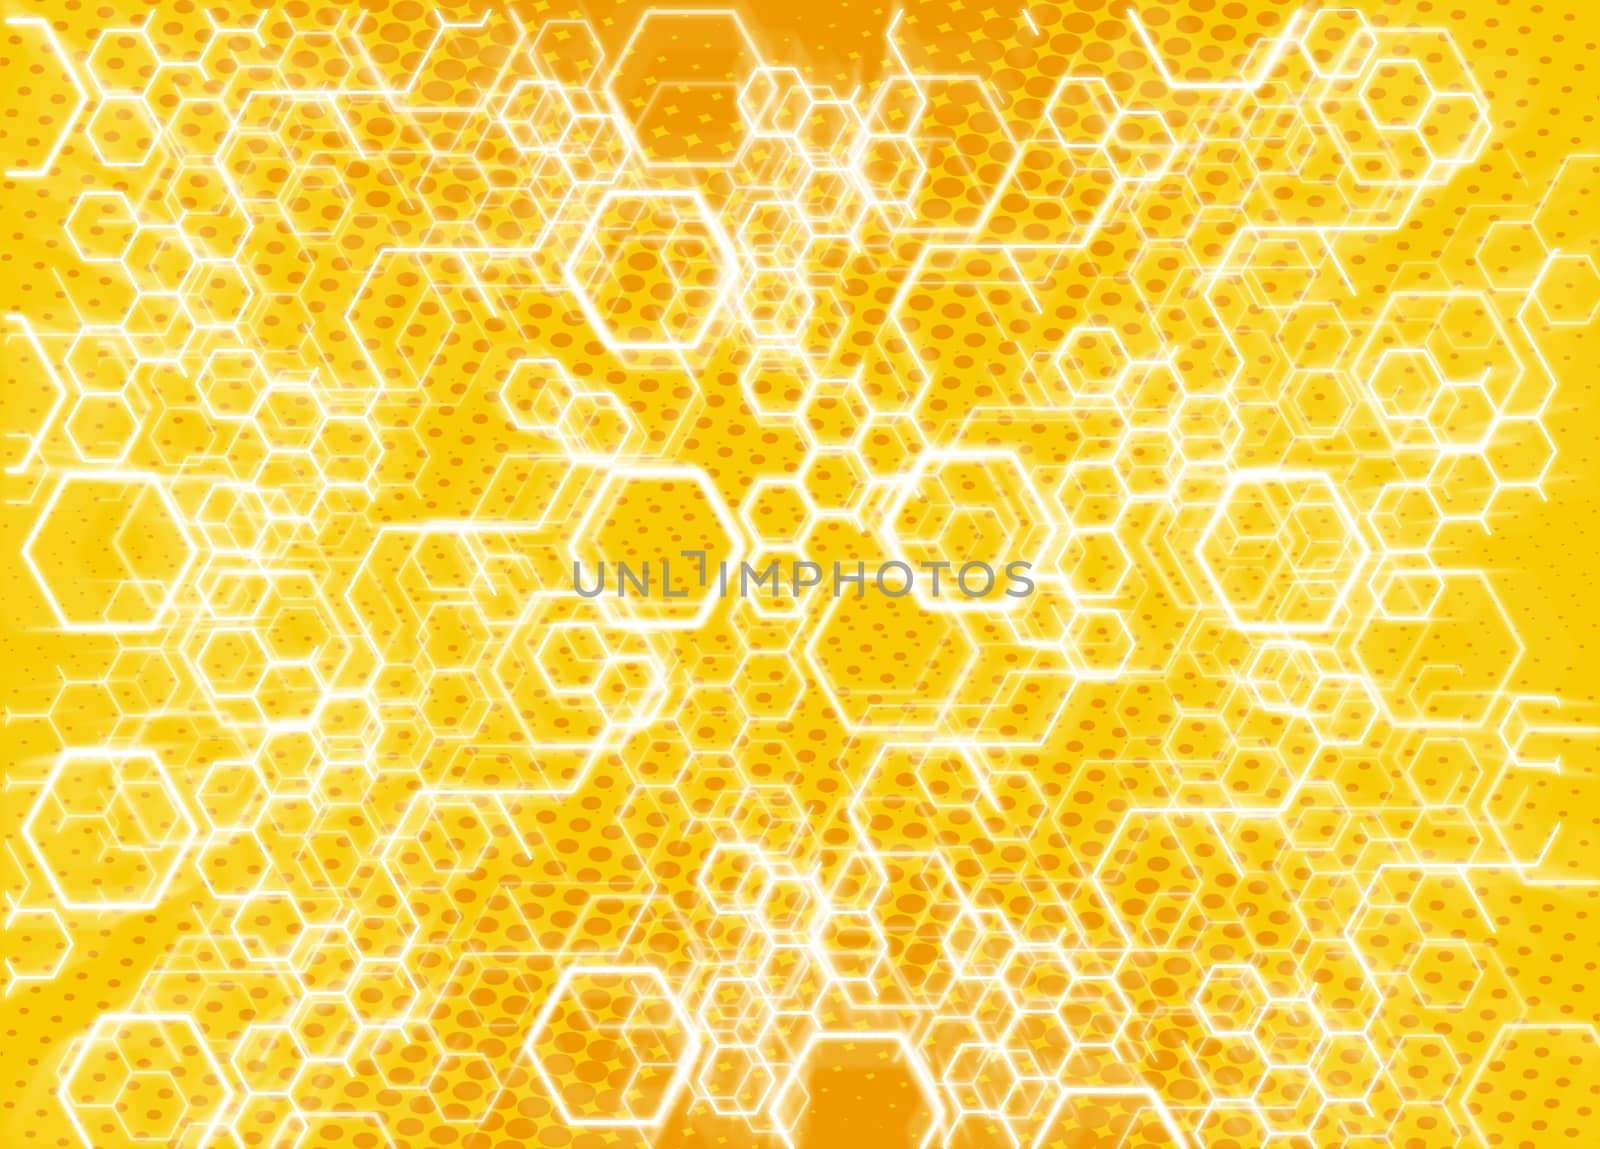 hexagons on yellow abstract background by sette